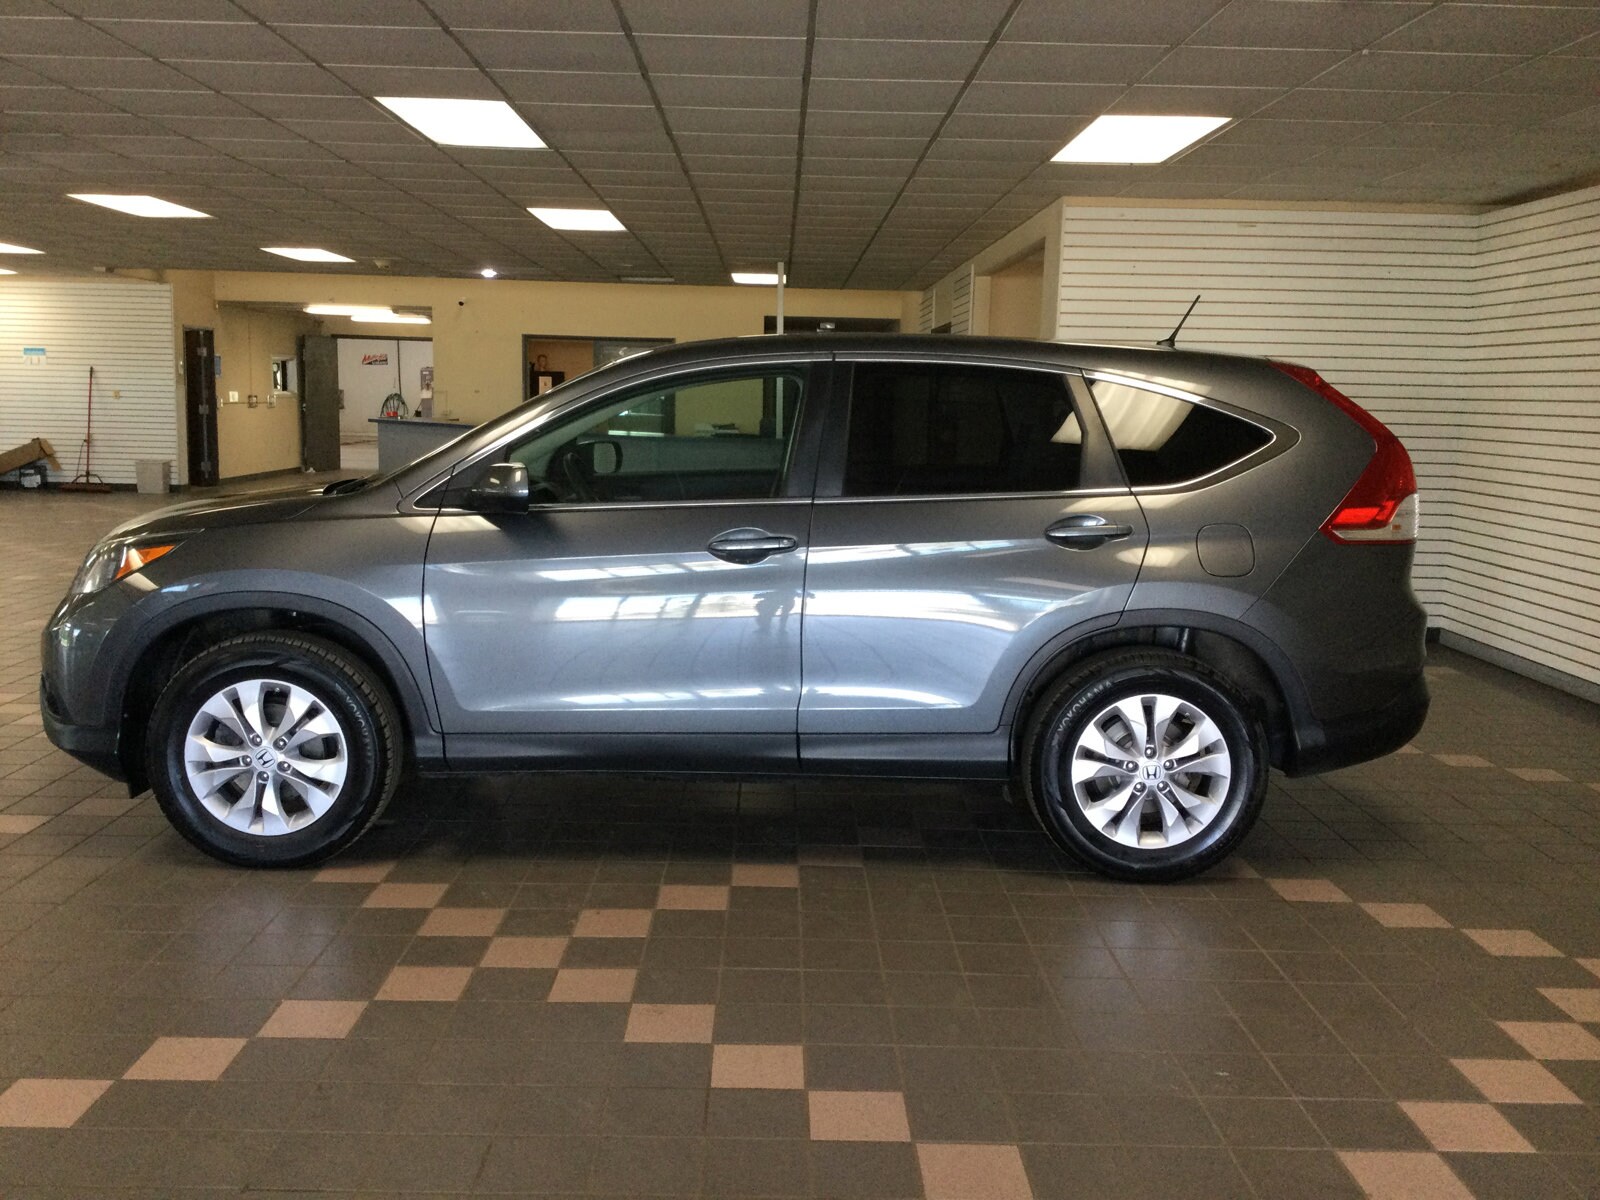 Used 2013 Honda CR-V EX with VIN 2HKRM4H59DH682274 for sale in Hermantown, Minnesota